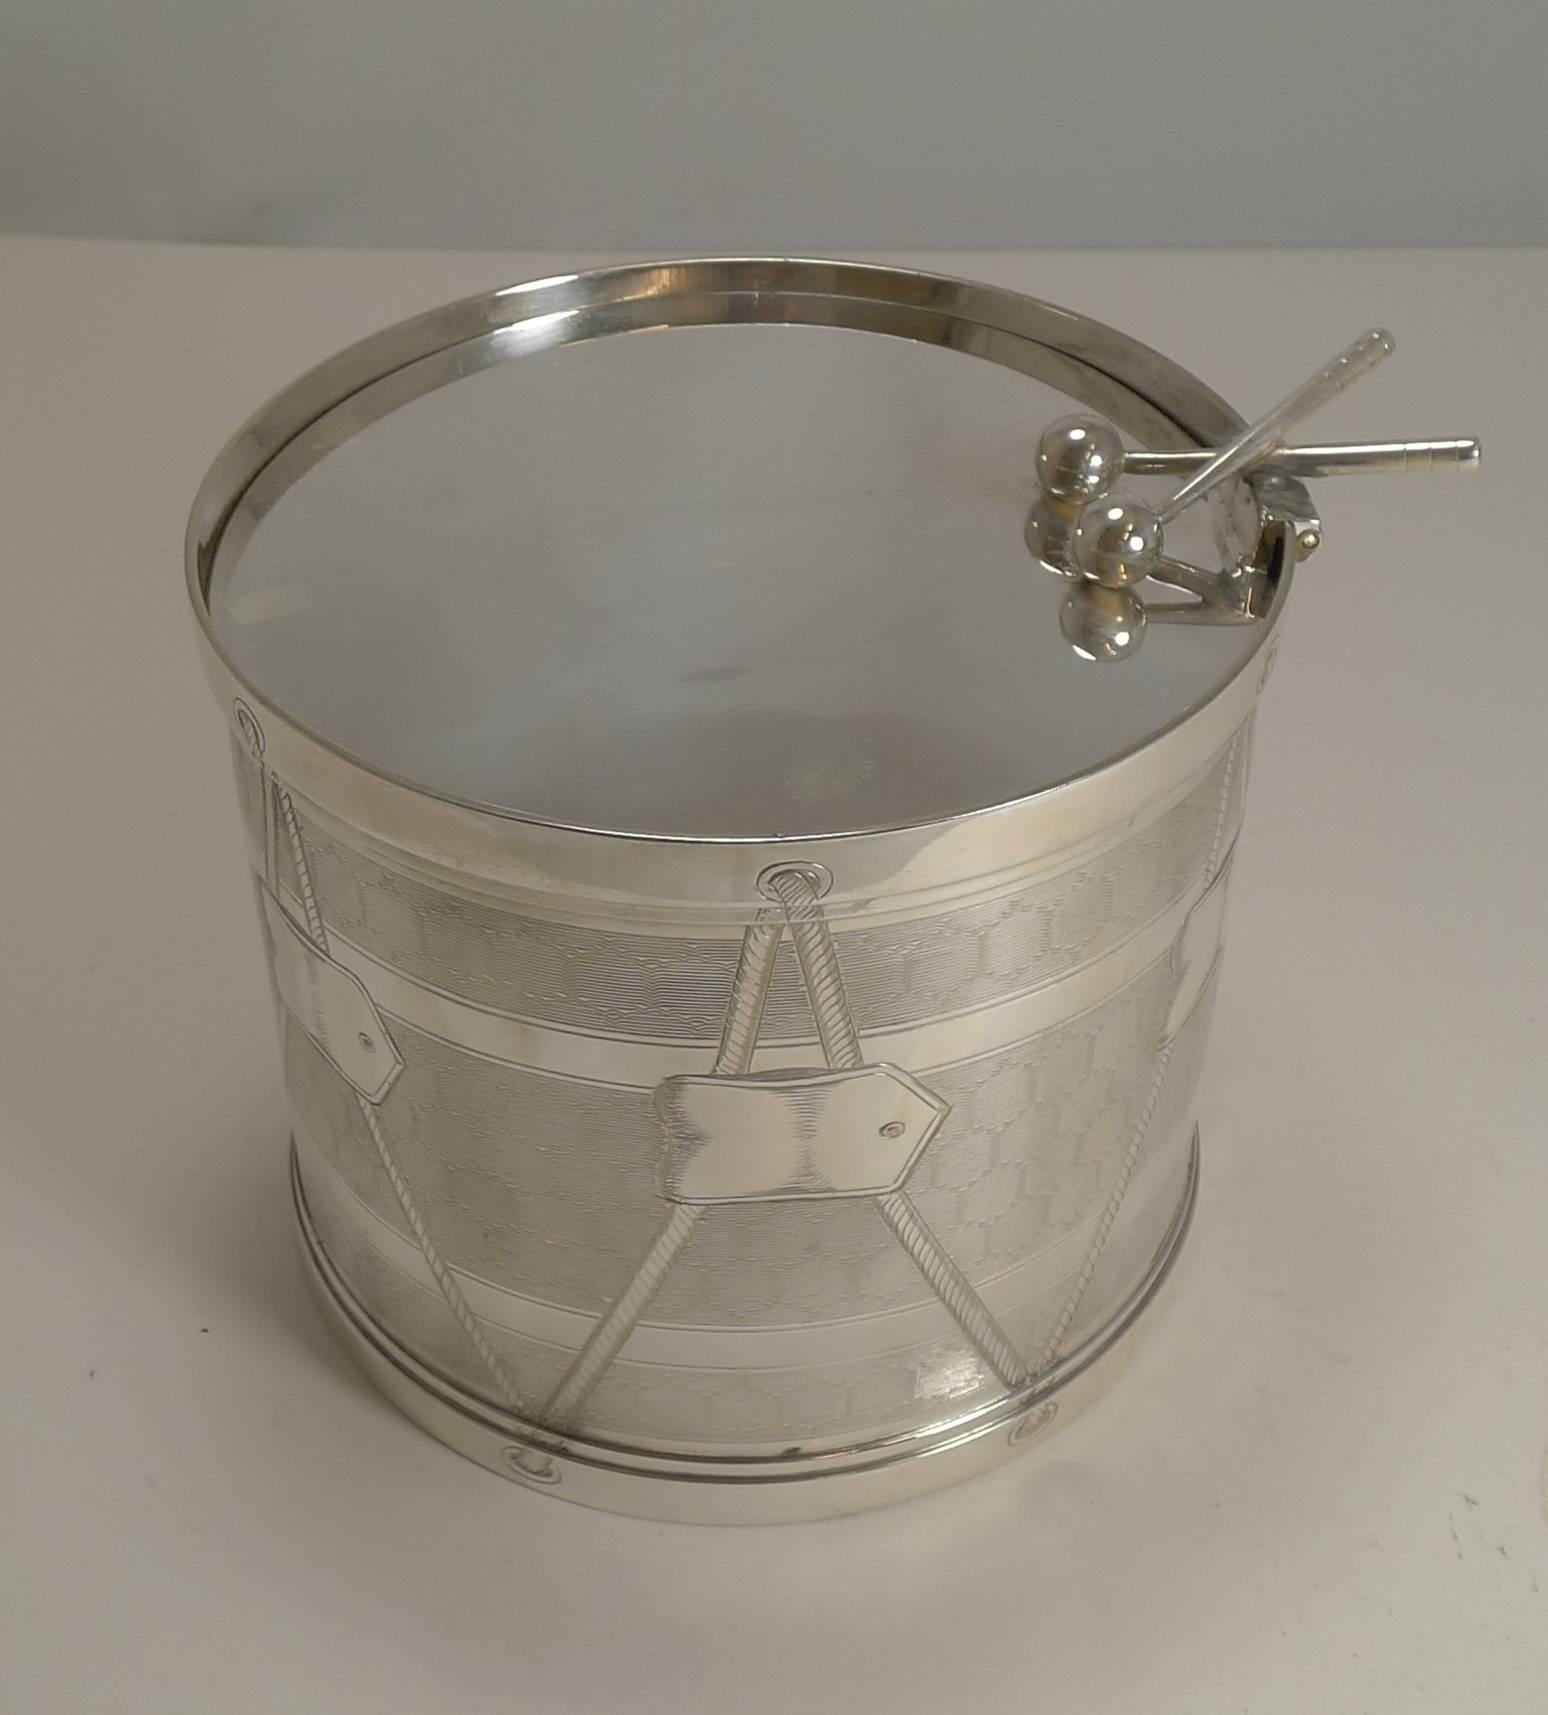 Magnificent and Rare Early Silver Plated Drum Biscuit Box on Stand, 1844 For Sale 2